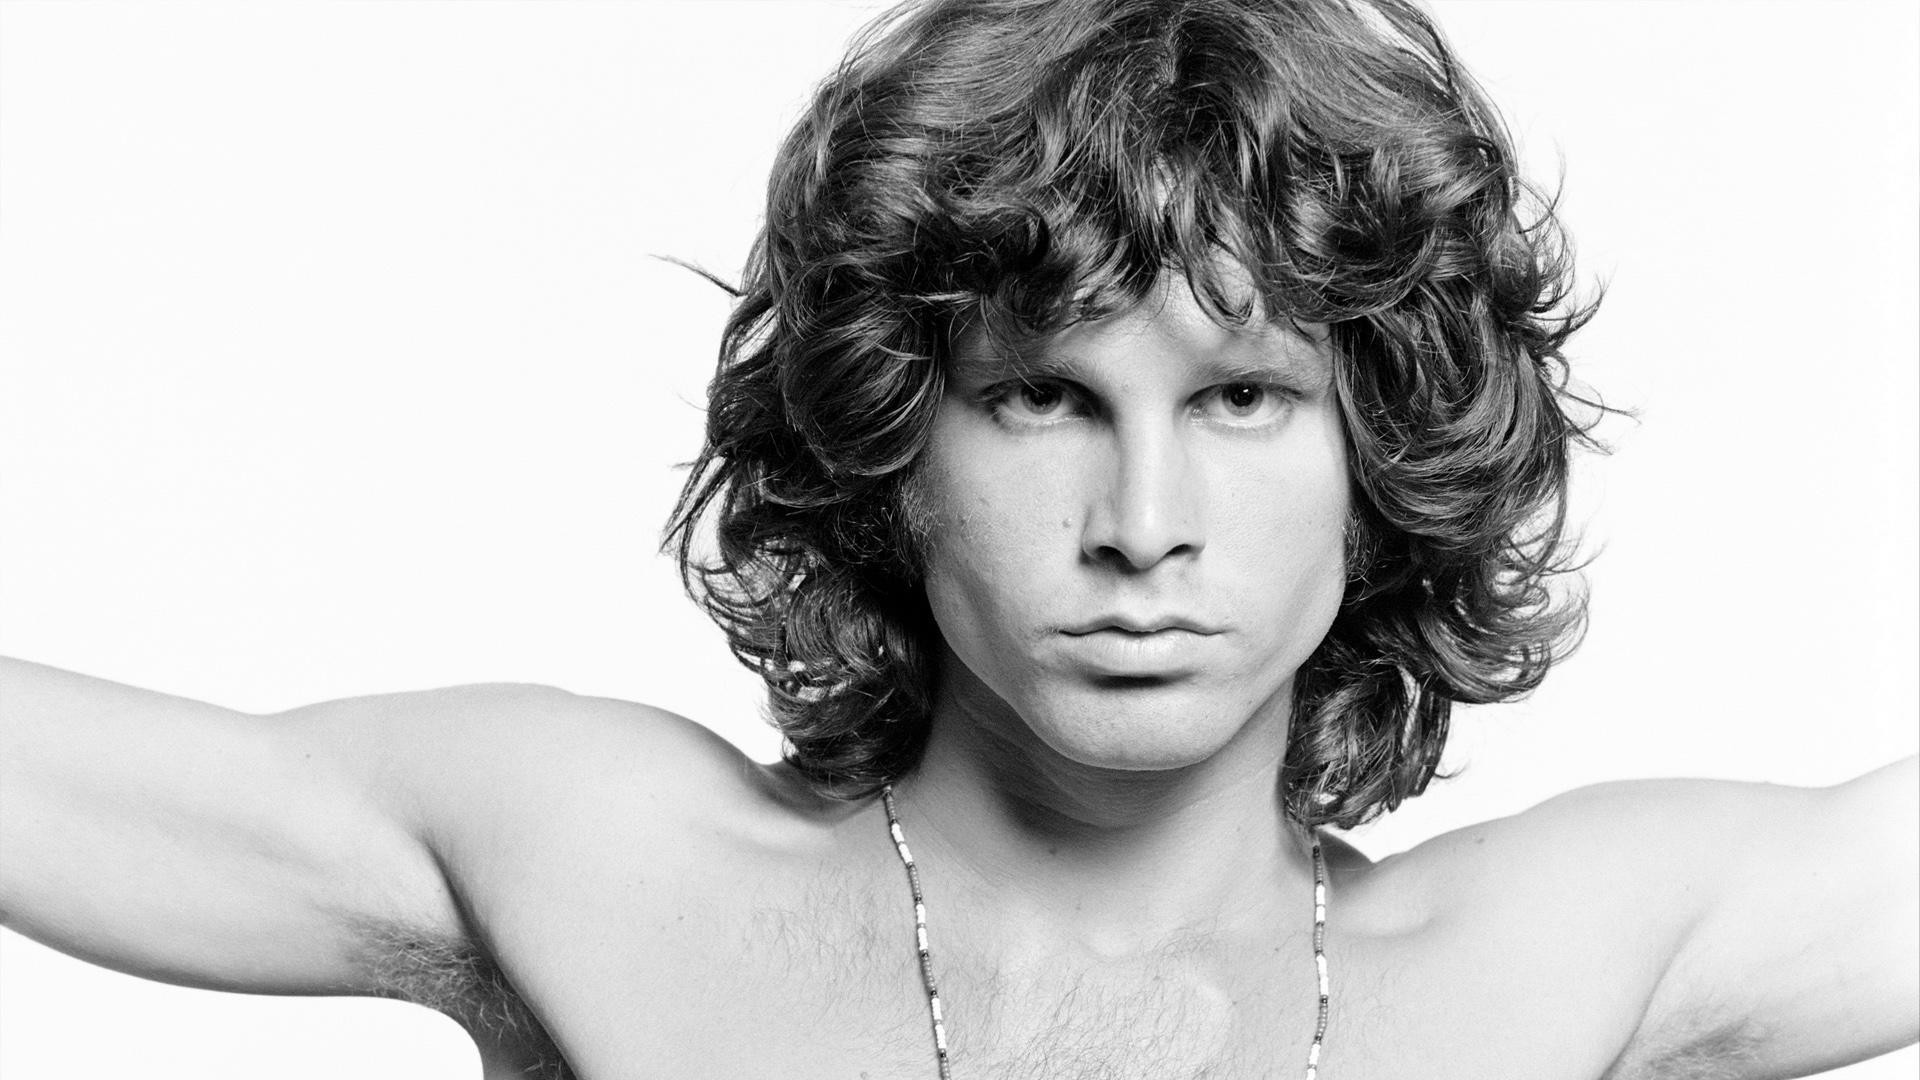 1920x1080 Jim Morrison Trivia: 50 interesting facts about the famous singer! |  Useless Daily: The amazing facts, news & trivia free newsletter!